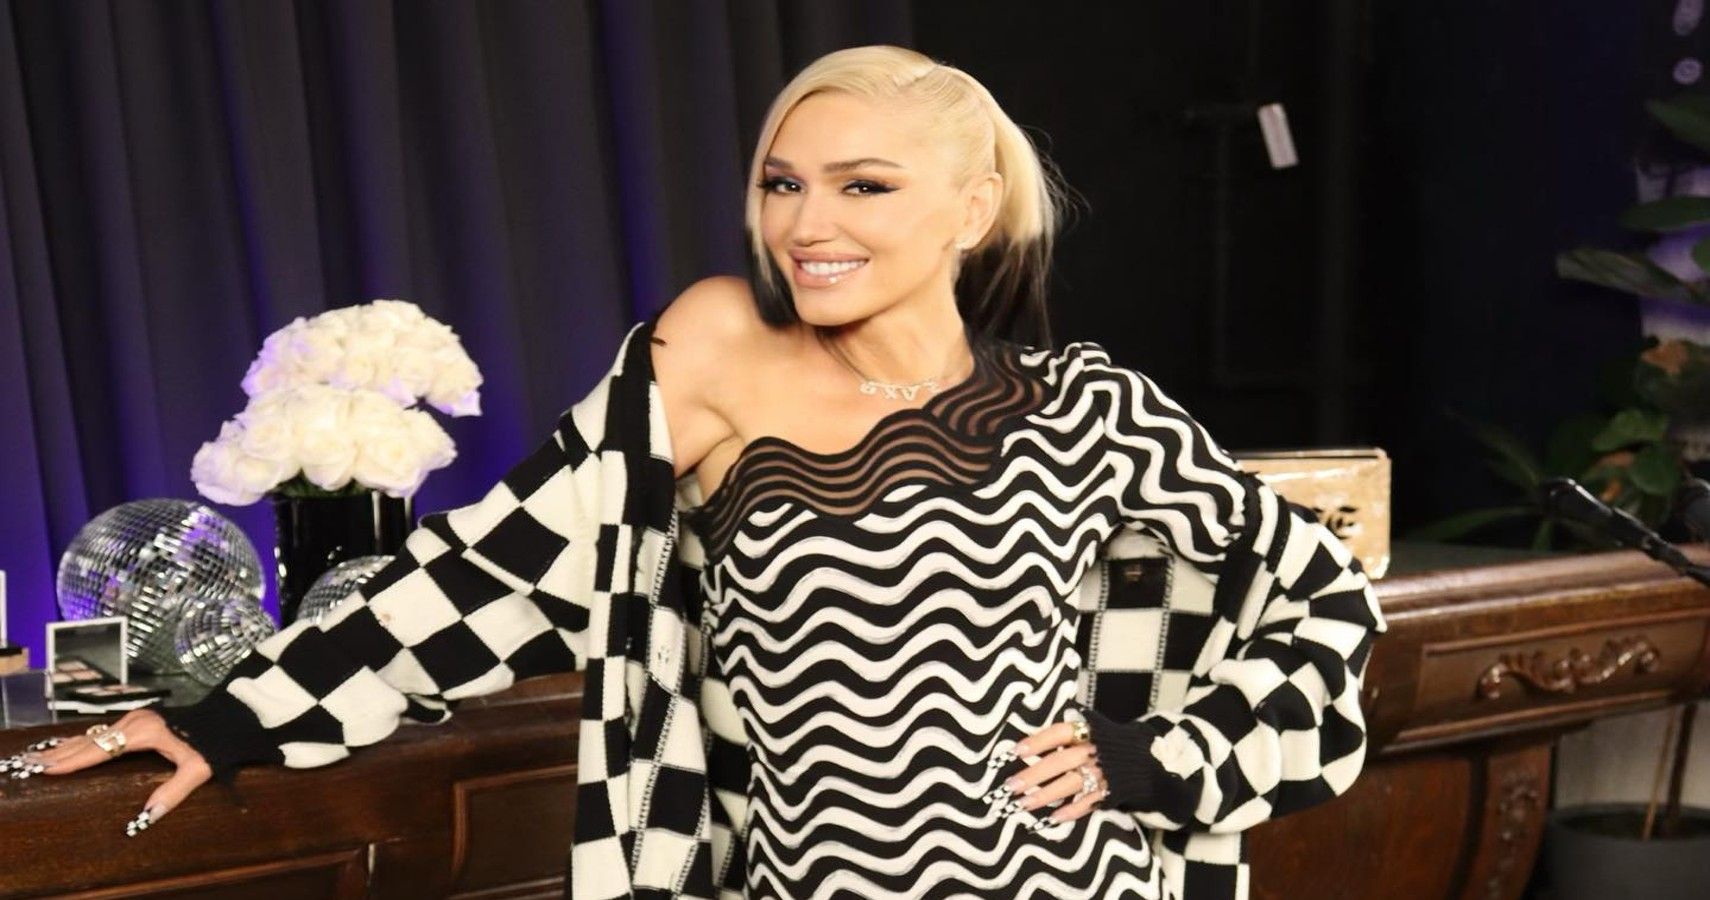 The Most Expensive Purchases Of Gwen Stefani, Ranked